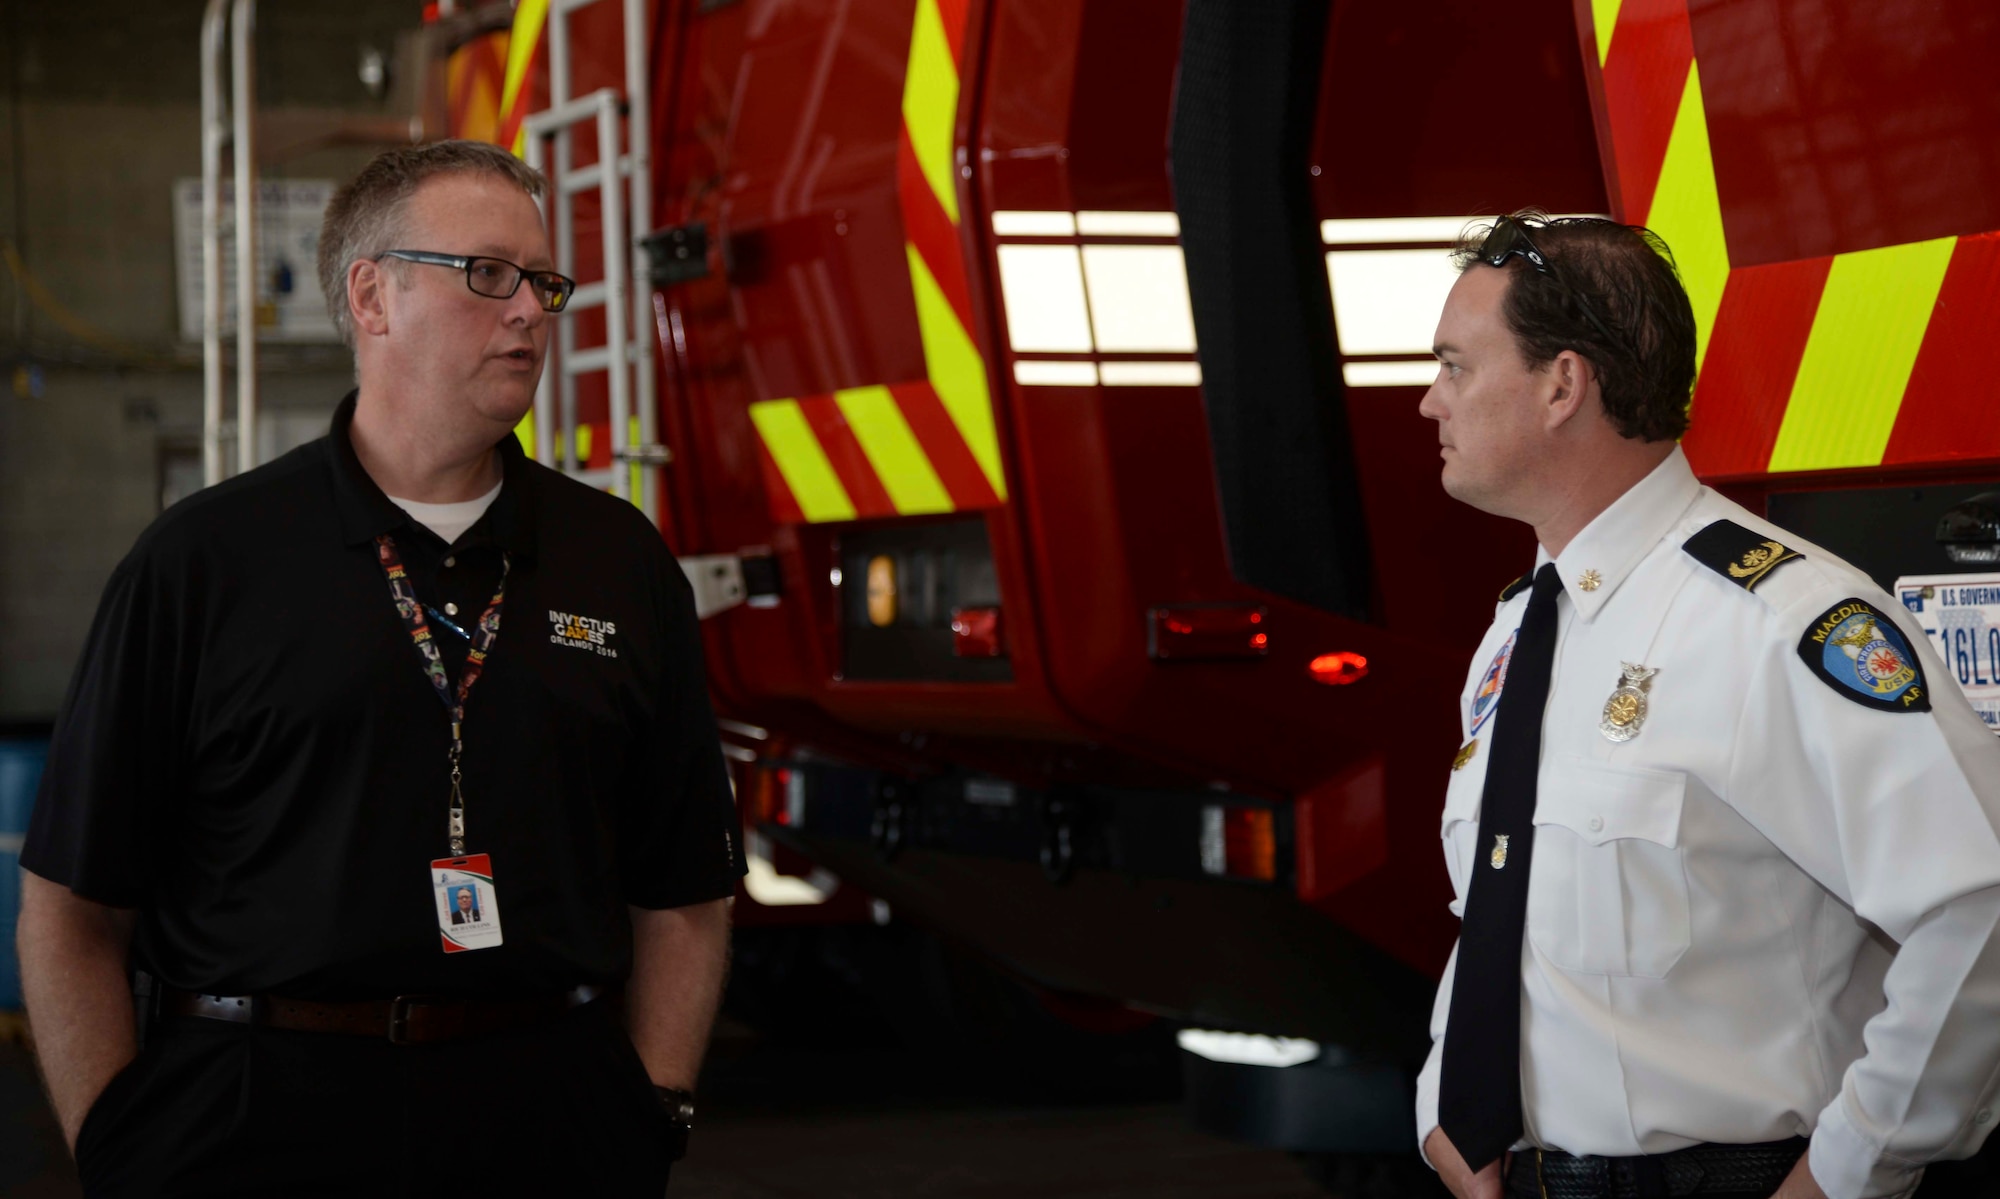 Richard Collins, left, the Sarasota County Emergency Services Responsible for Fire, EMS, Emergency Operations Center director, discusses emergency processes with Matthew Amann, the deputy fire chief assigned to the 6th Civil Engineer Squadron, during a tour at MacDill Air Force Base, Fla., Dec. 2, 2016. The EMS team visited MacDill to view its command post and emergency services operations, as well as compare processes with Team MacDill’s.(U.S. Air Force photo by Senior Airman Vernon L. Fowler Jr.)